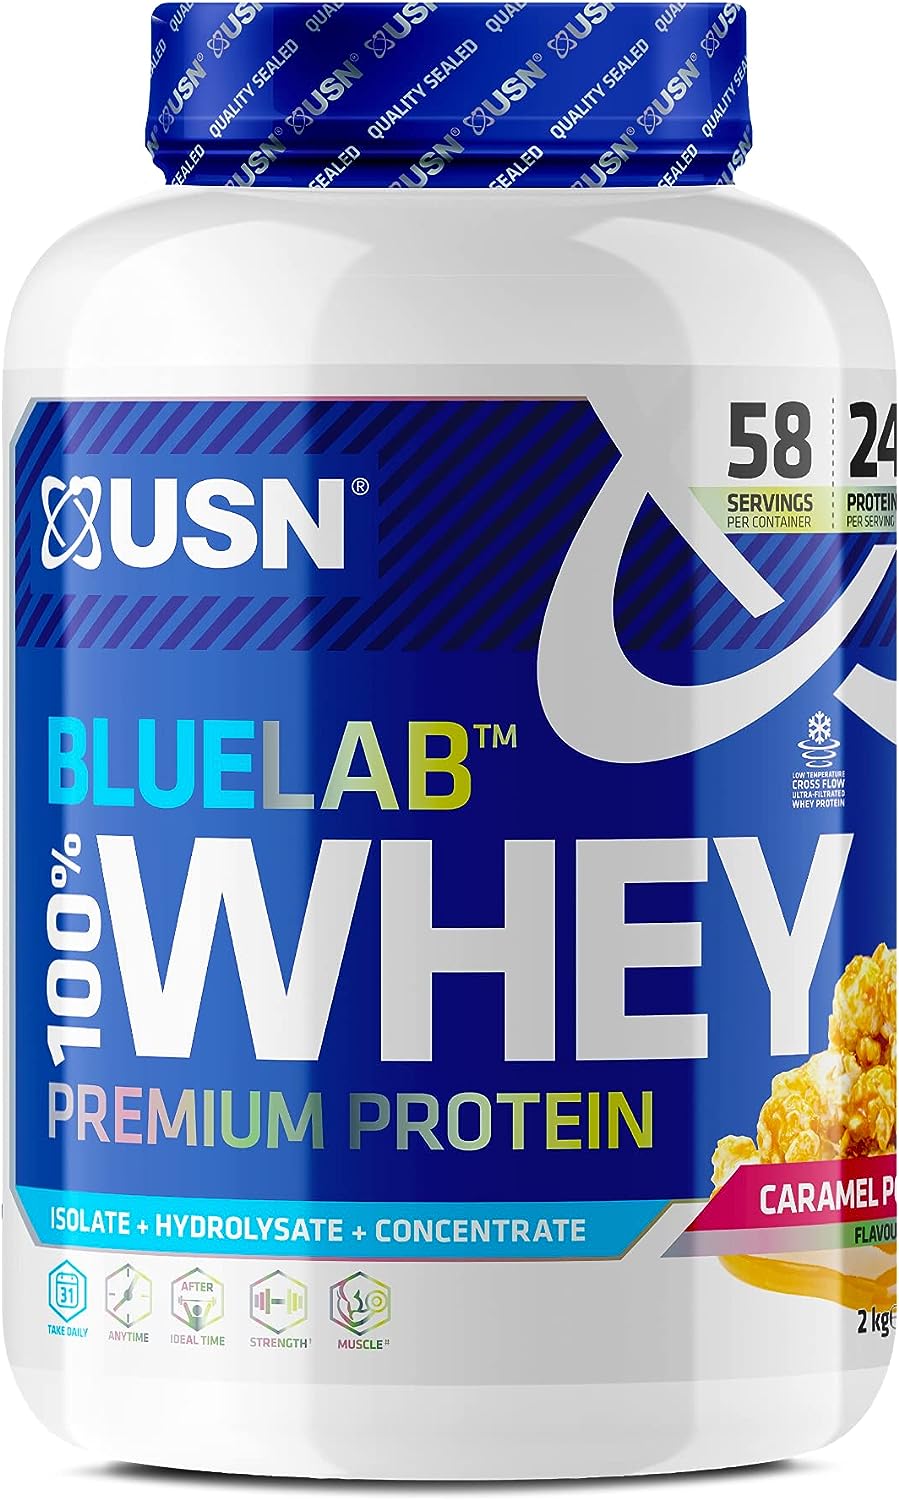 USN Blue Lab Whey Protein Powder: Caramel Popcorn - Whey Protein 2kg - Post-Workout - Whey Isolate - Muscle Building Powder Supplement With Added BCAAs